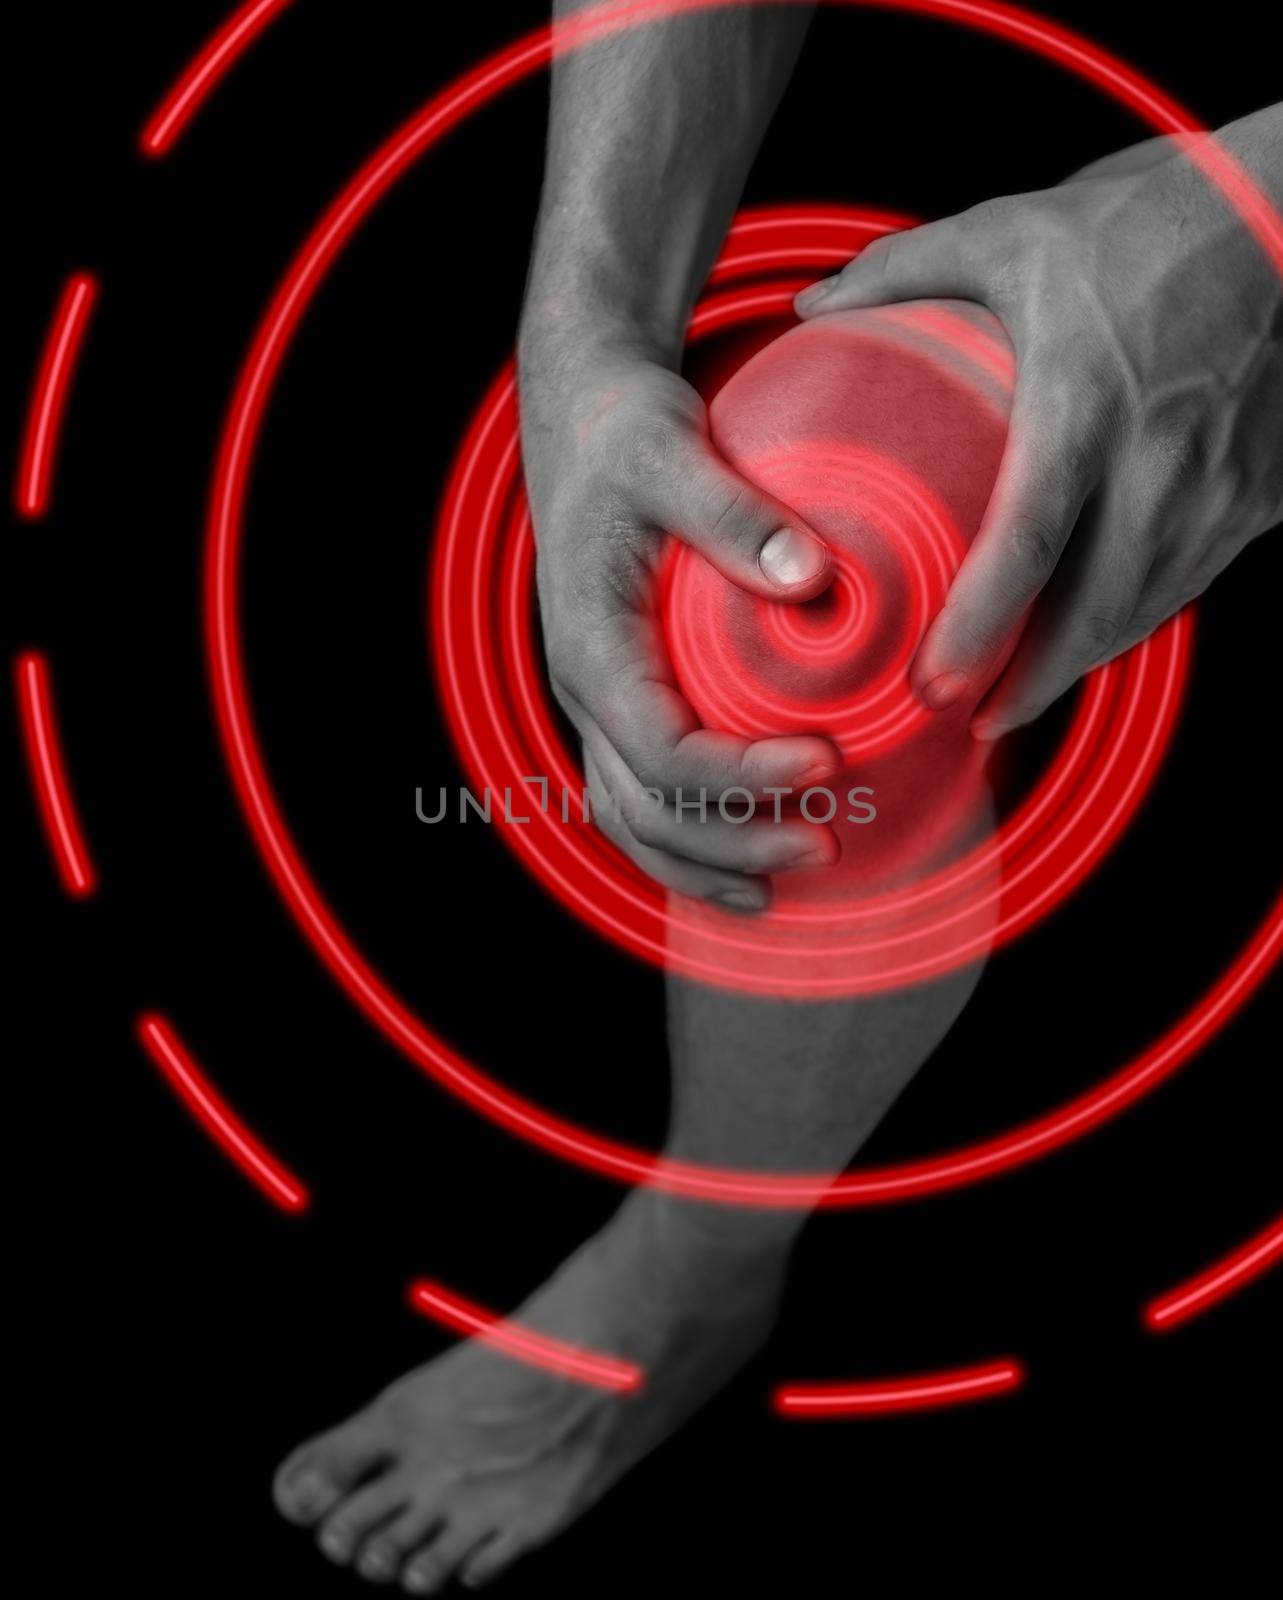 Pain in the male knee joint, monochrome image, pain area of red color